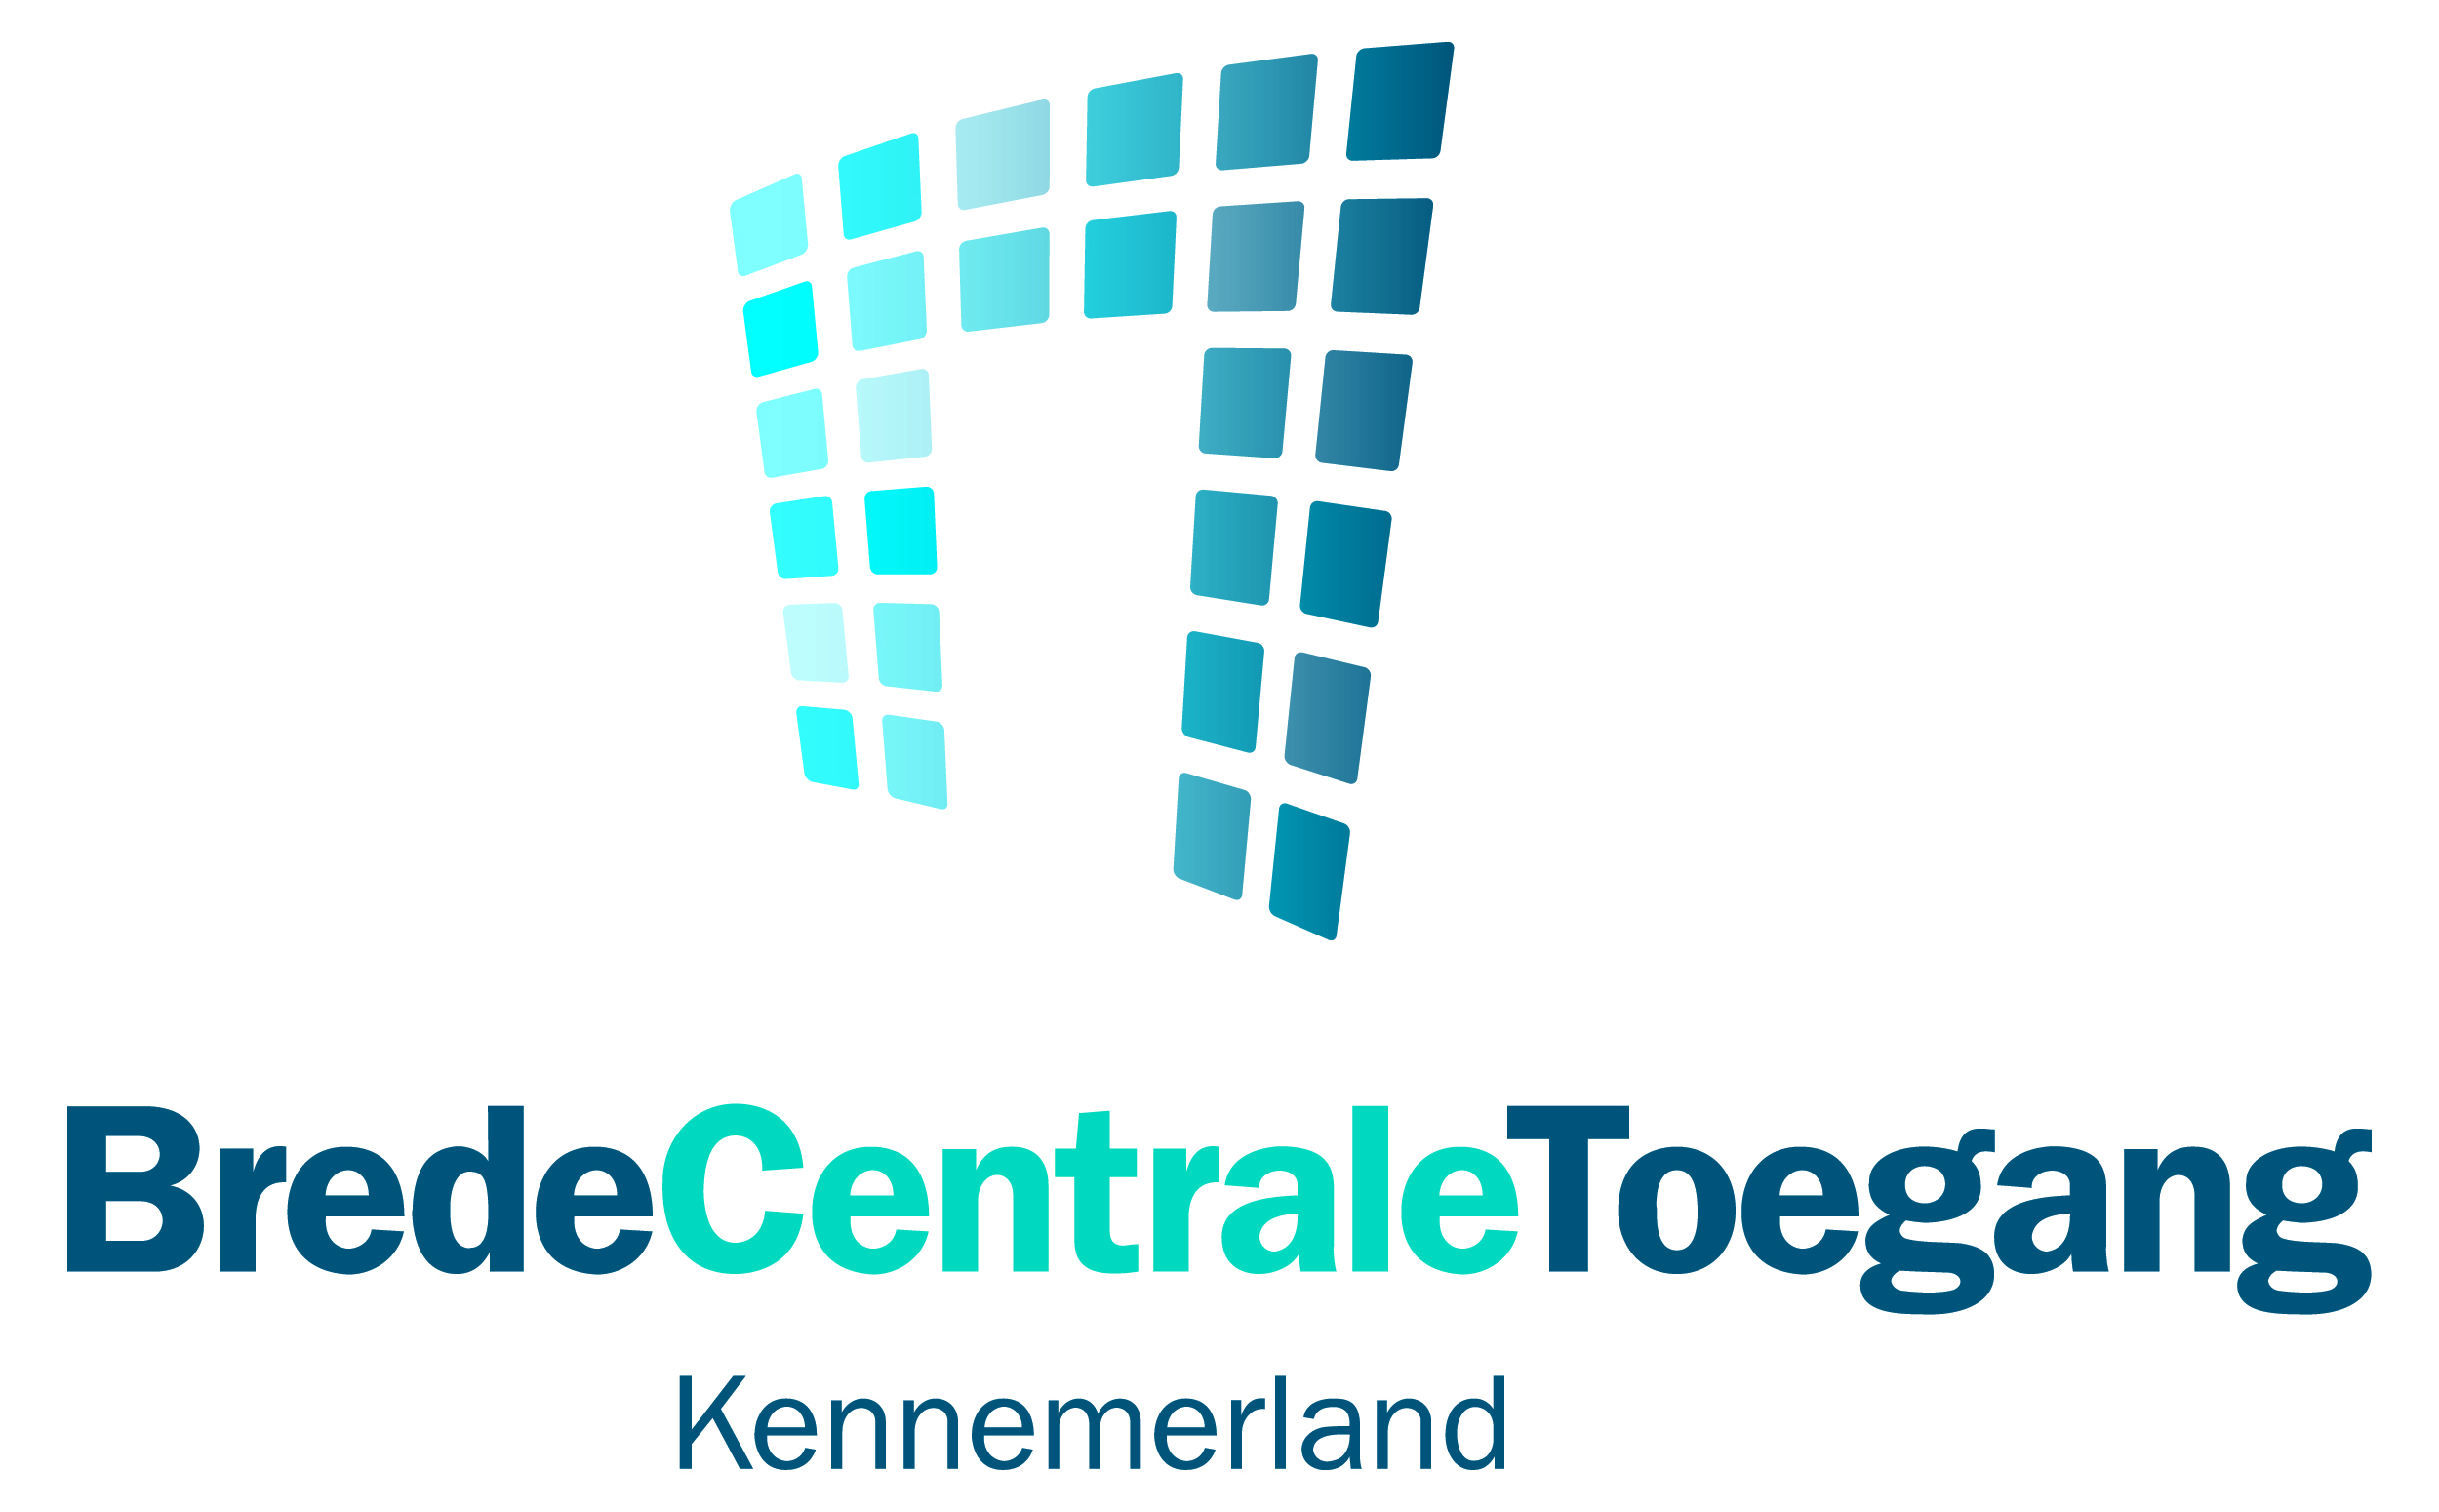 Brede Centrale Toegang